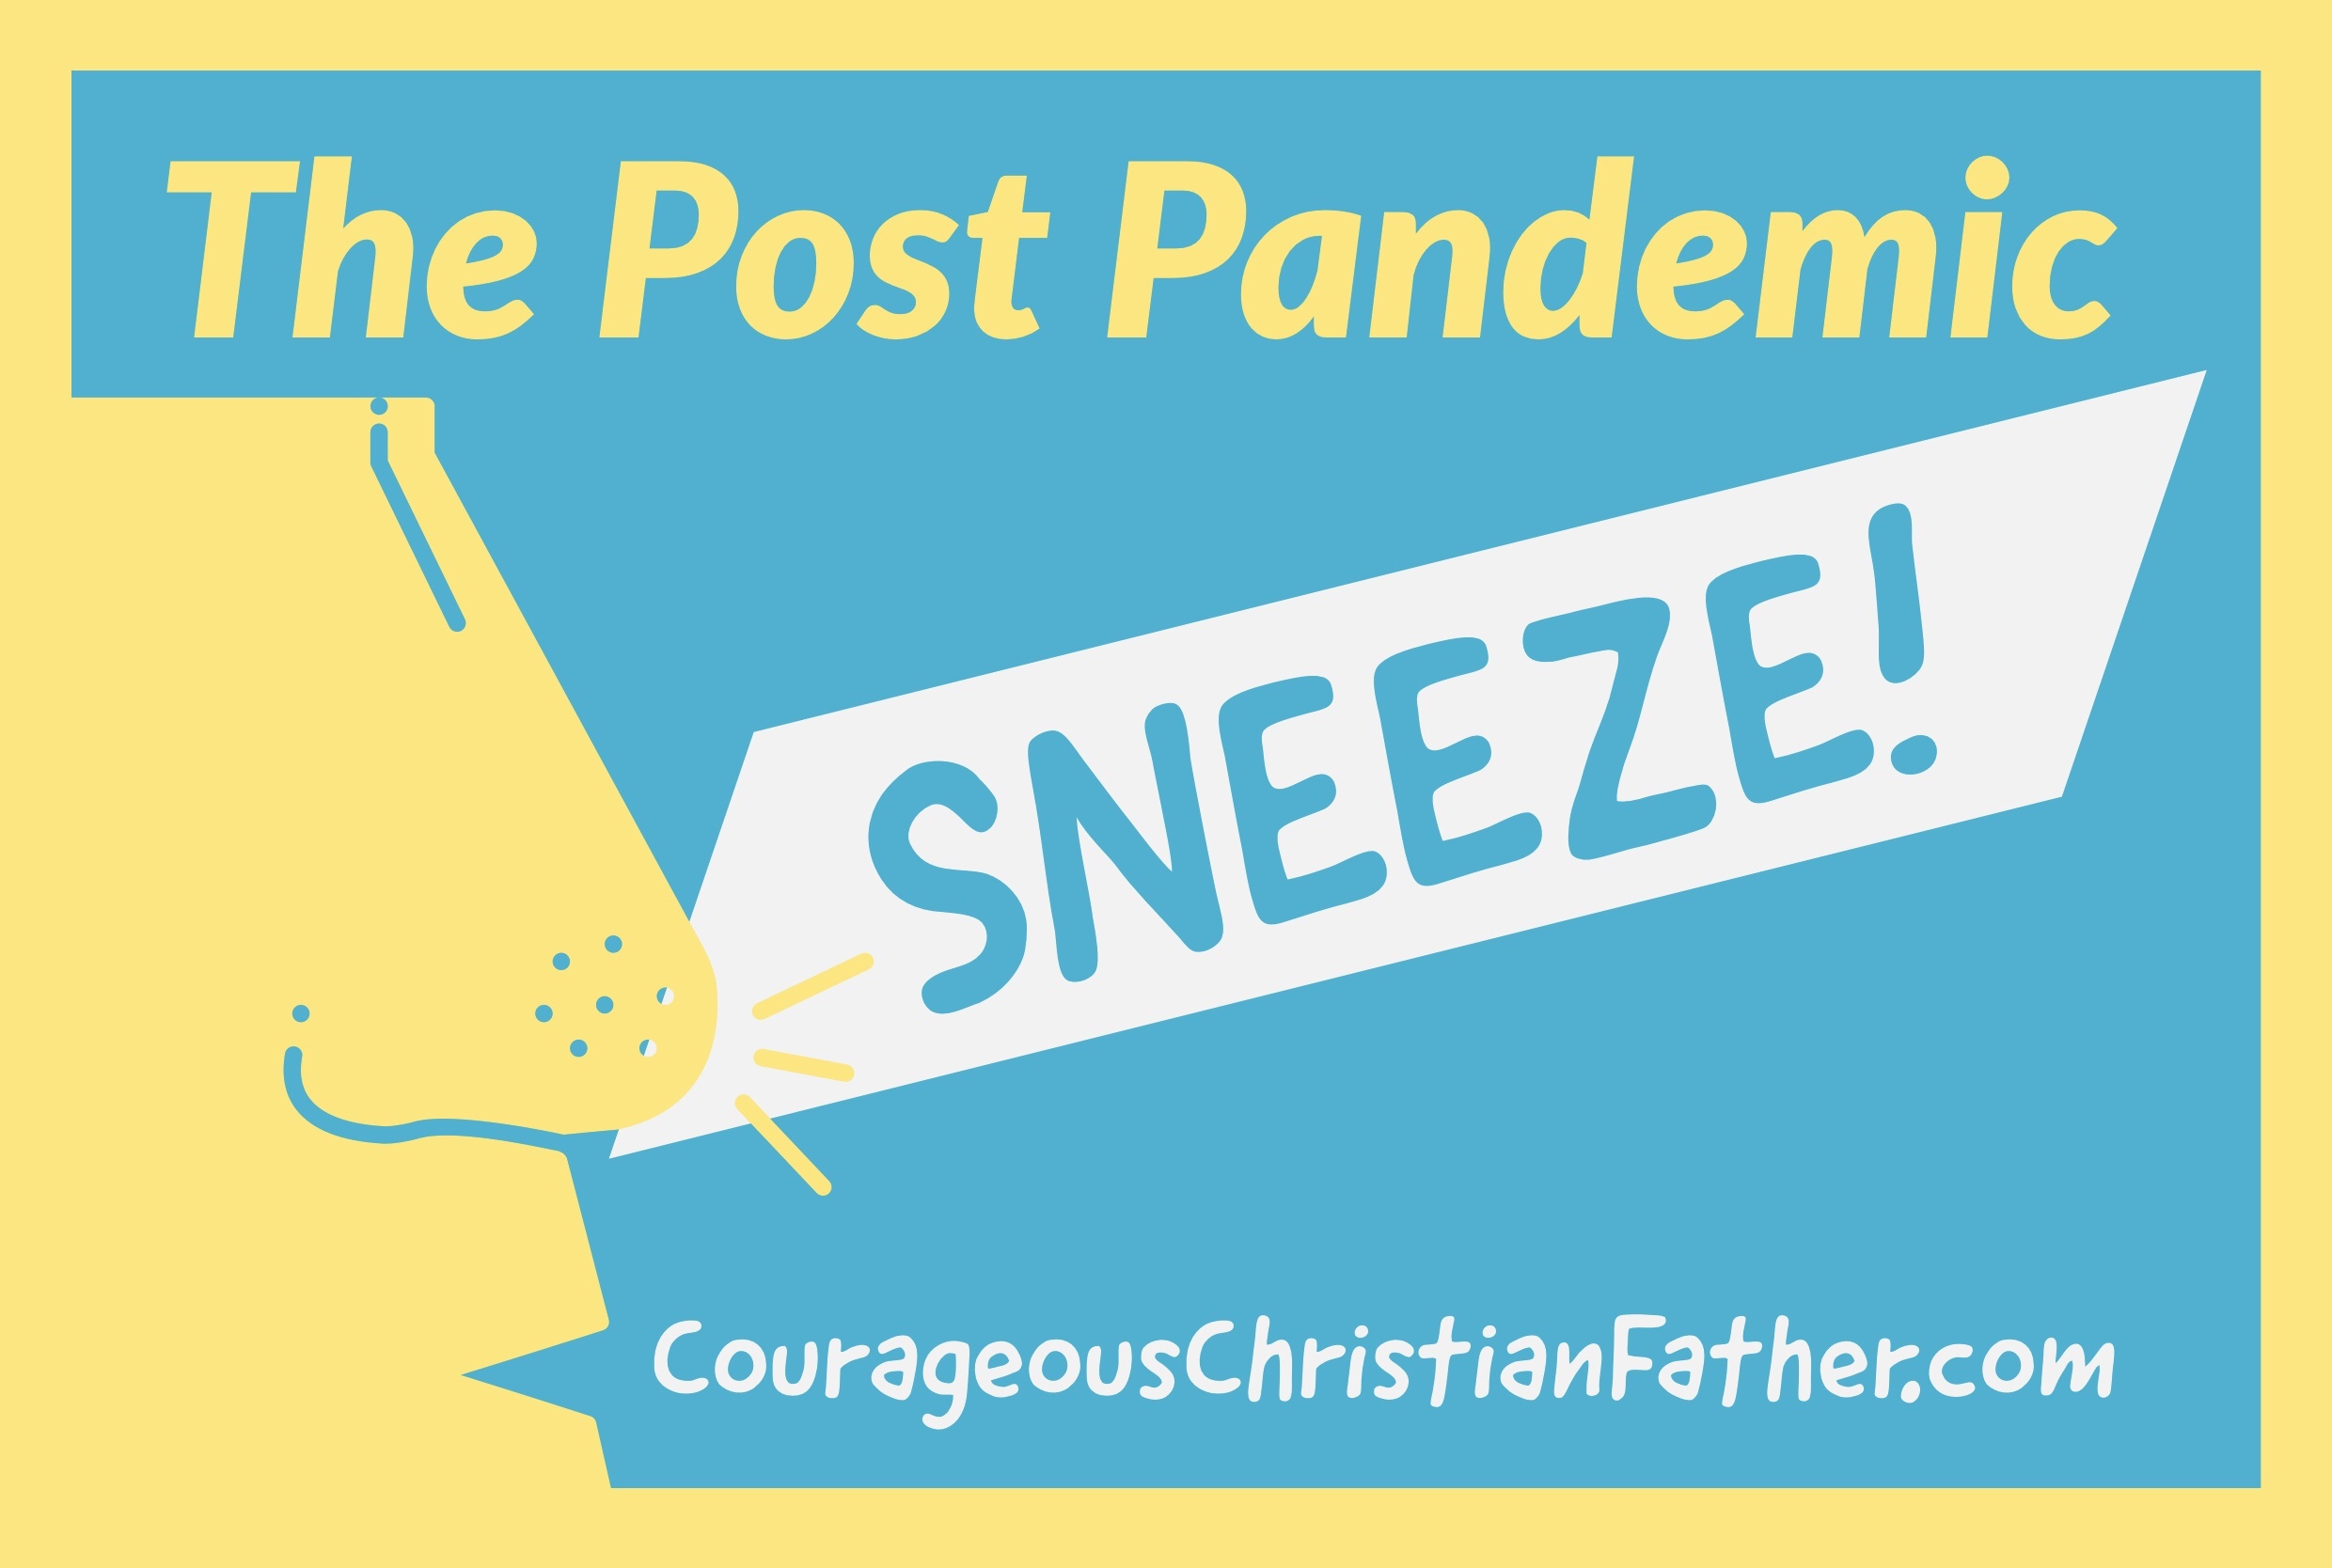 The Post Pandemic Sneeze - Because of the pandemic of the COVID-19 Coronavirus, those of us with allergies are afraid to sneeze anywhere.